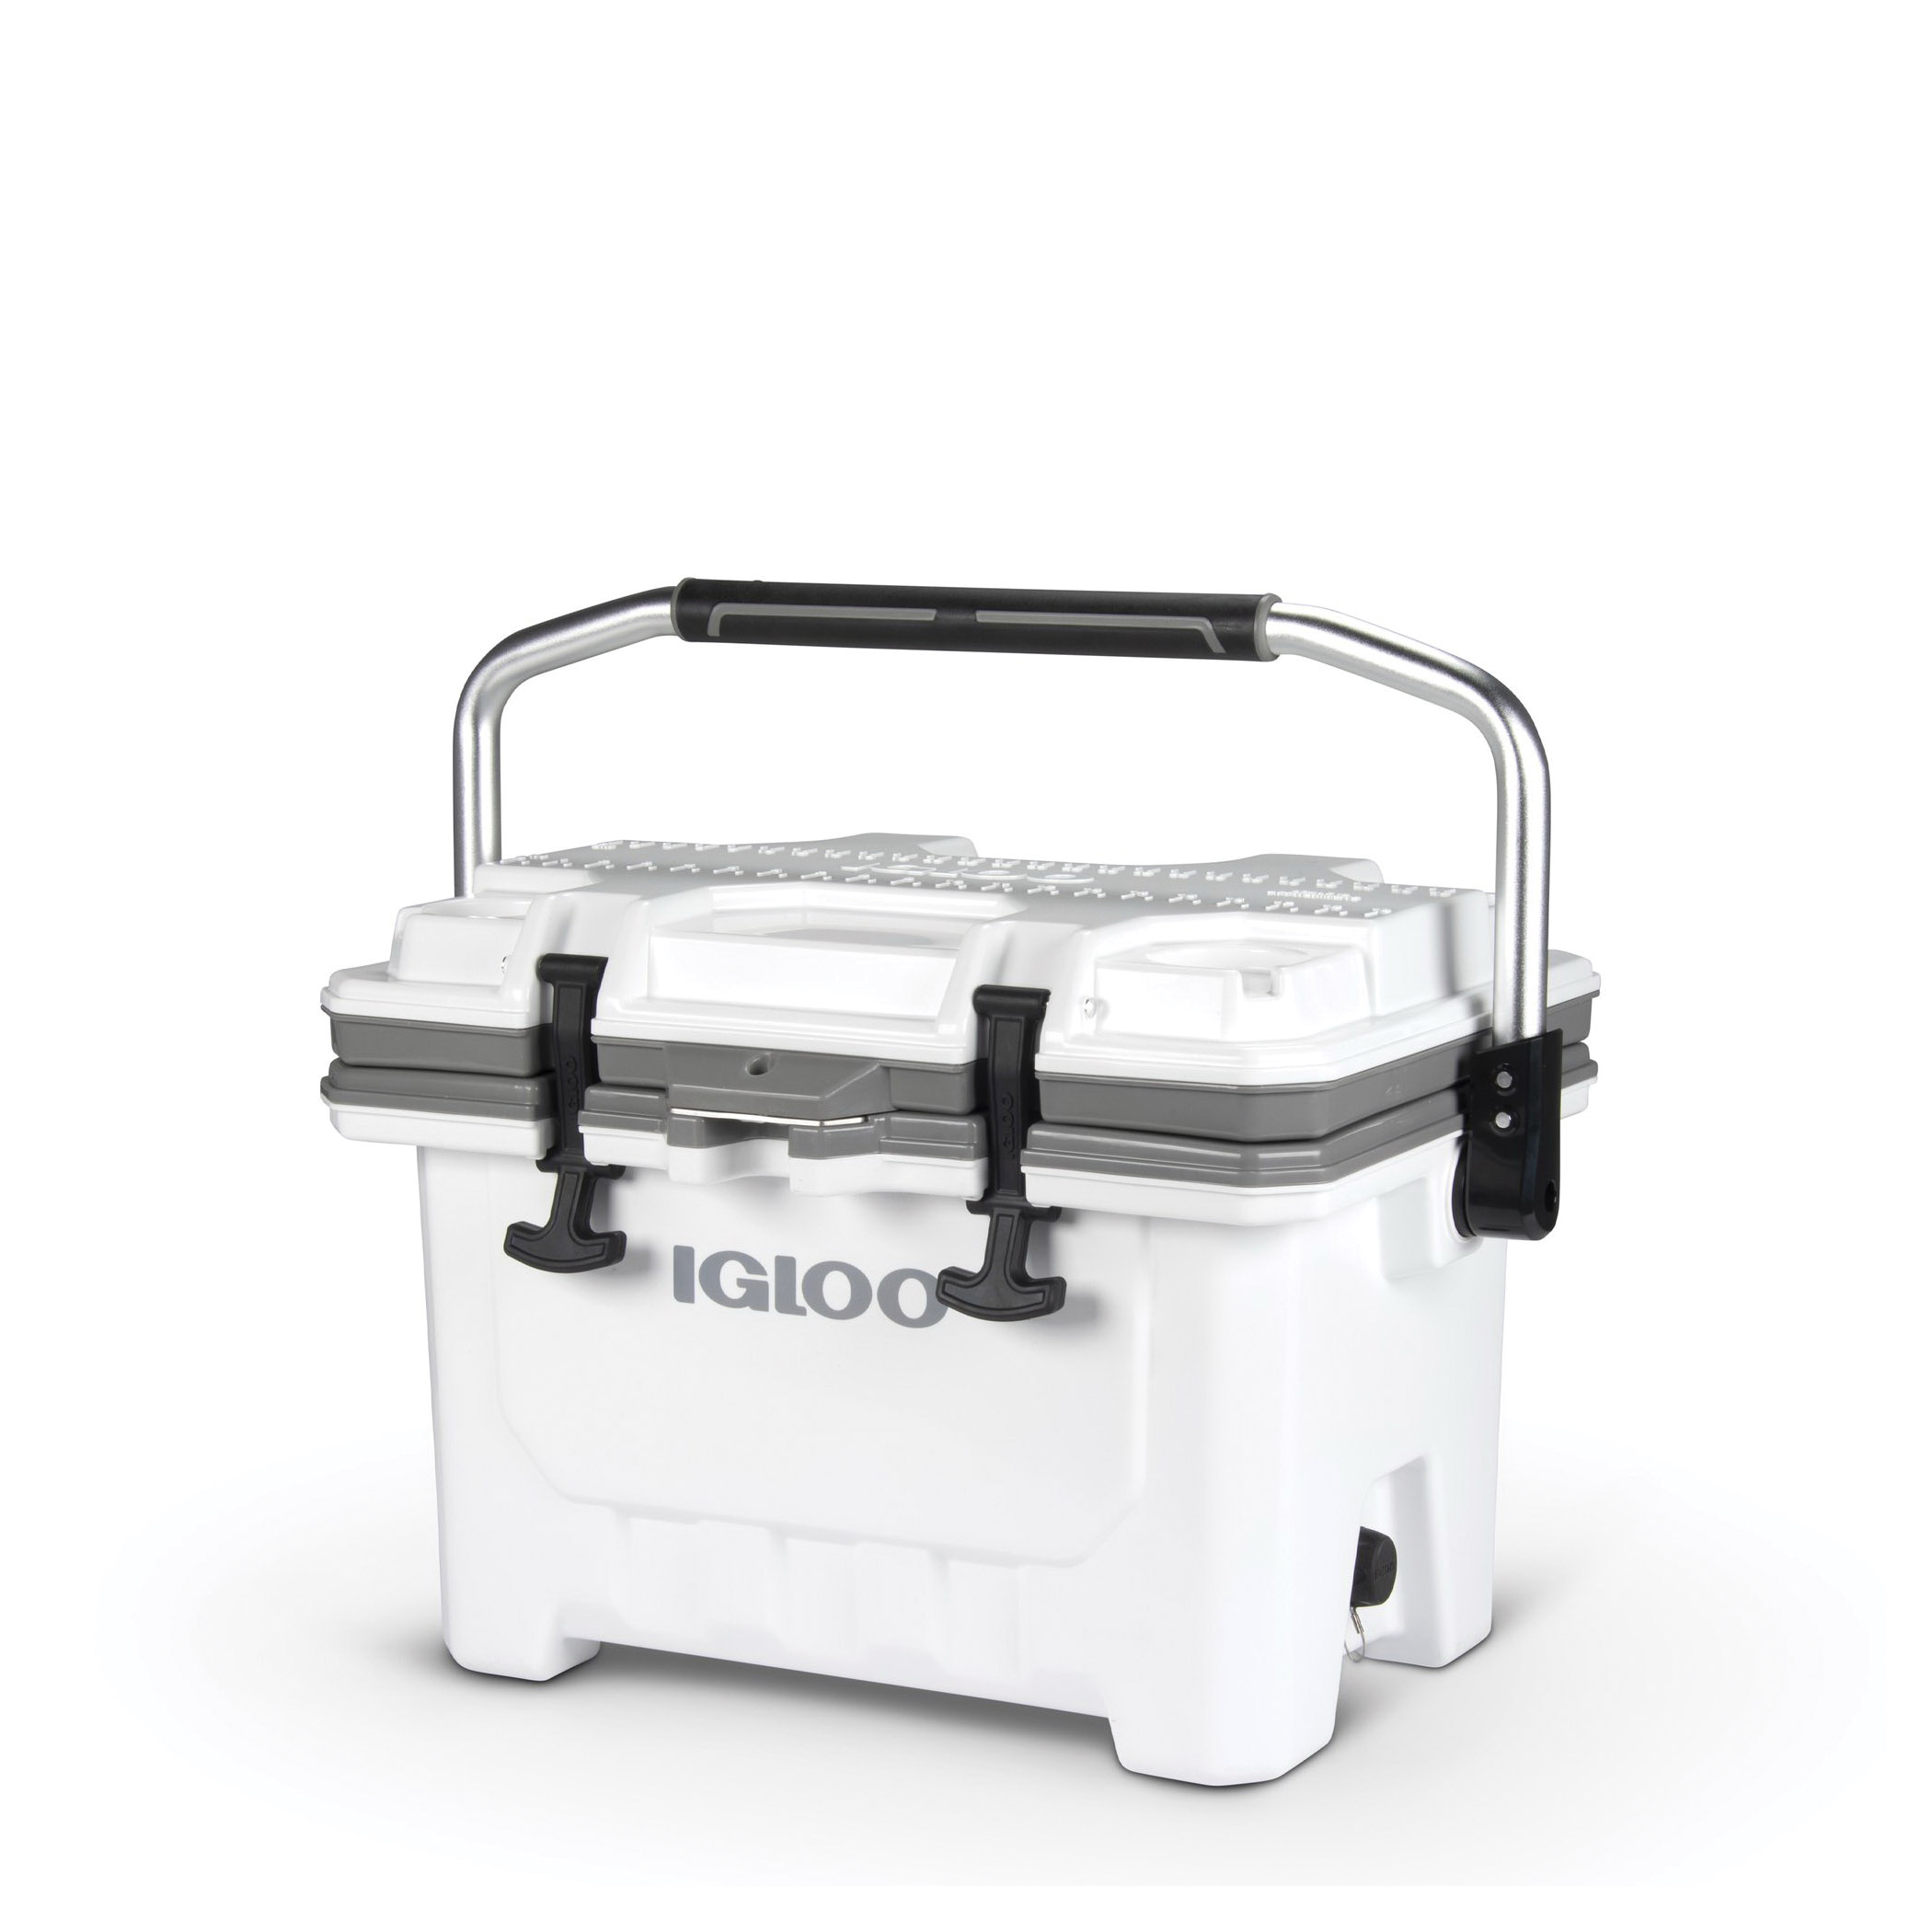 IGLOO IMX 49829 Cooler, 7.3 kg Cooler, Rubber/Stainless Steel, White - 2